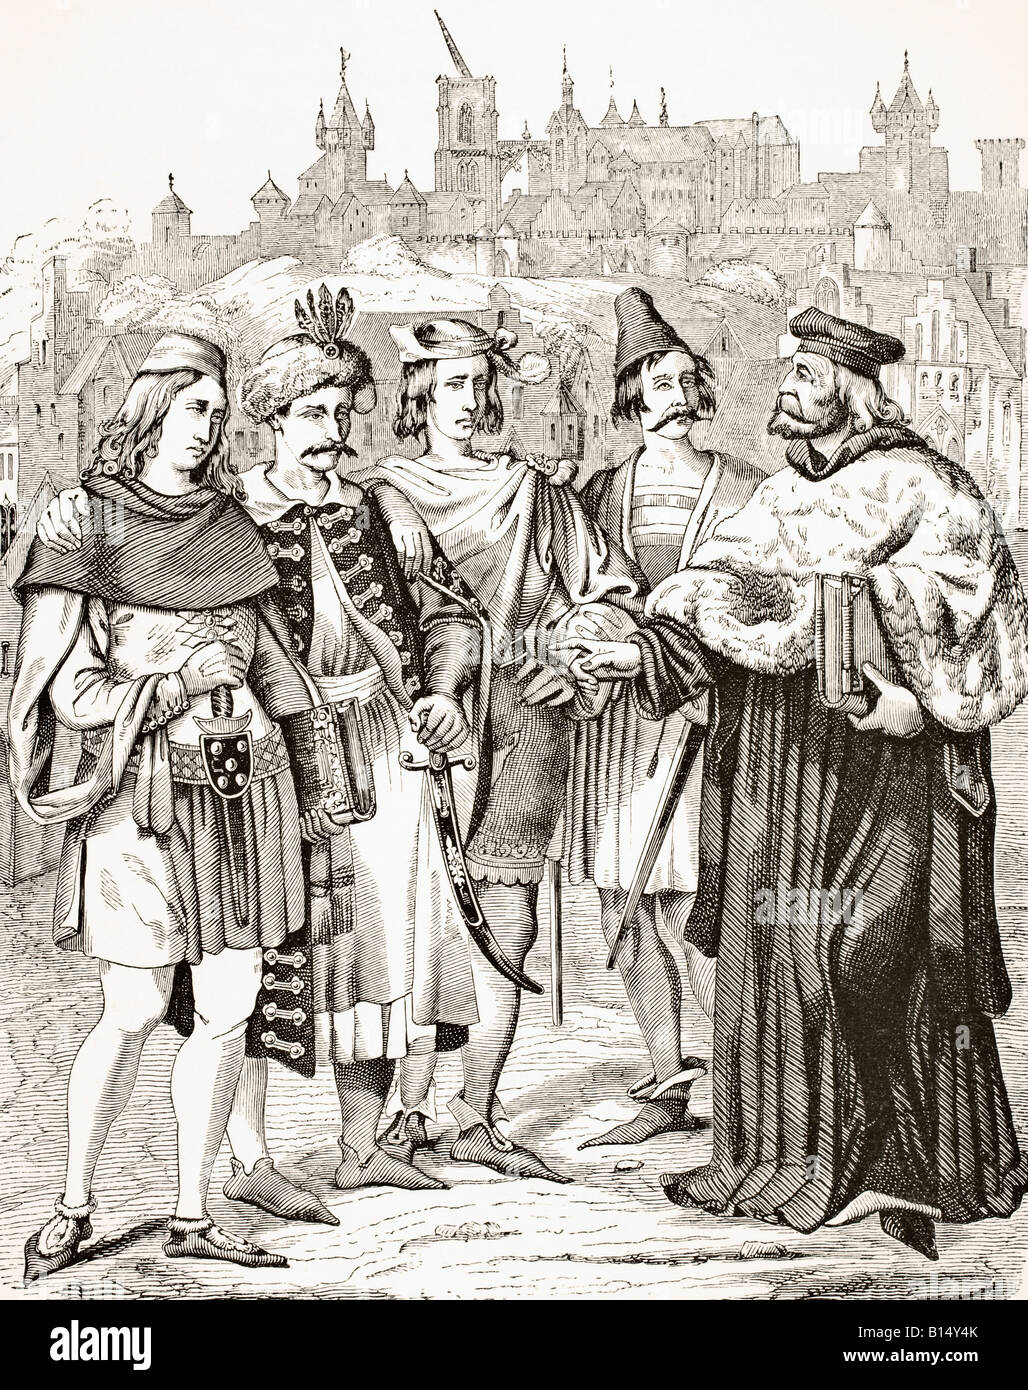 Rector of Prague University and Scholars from different Nations, circa 15th century. Stock Photo